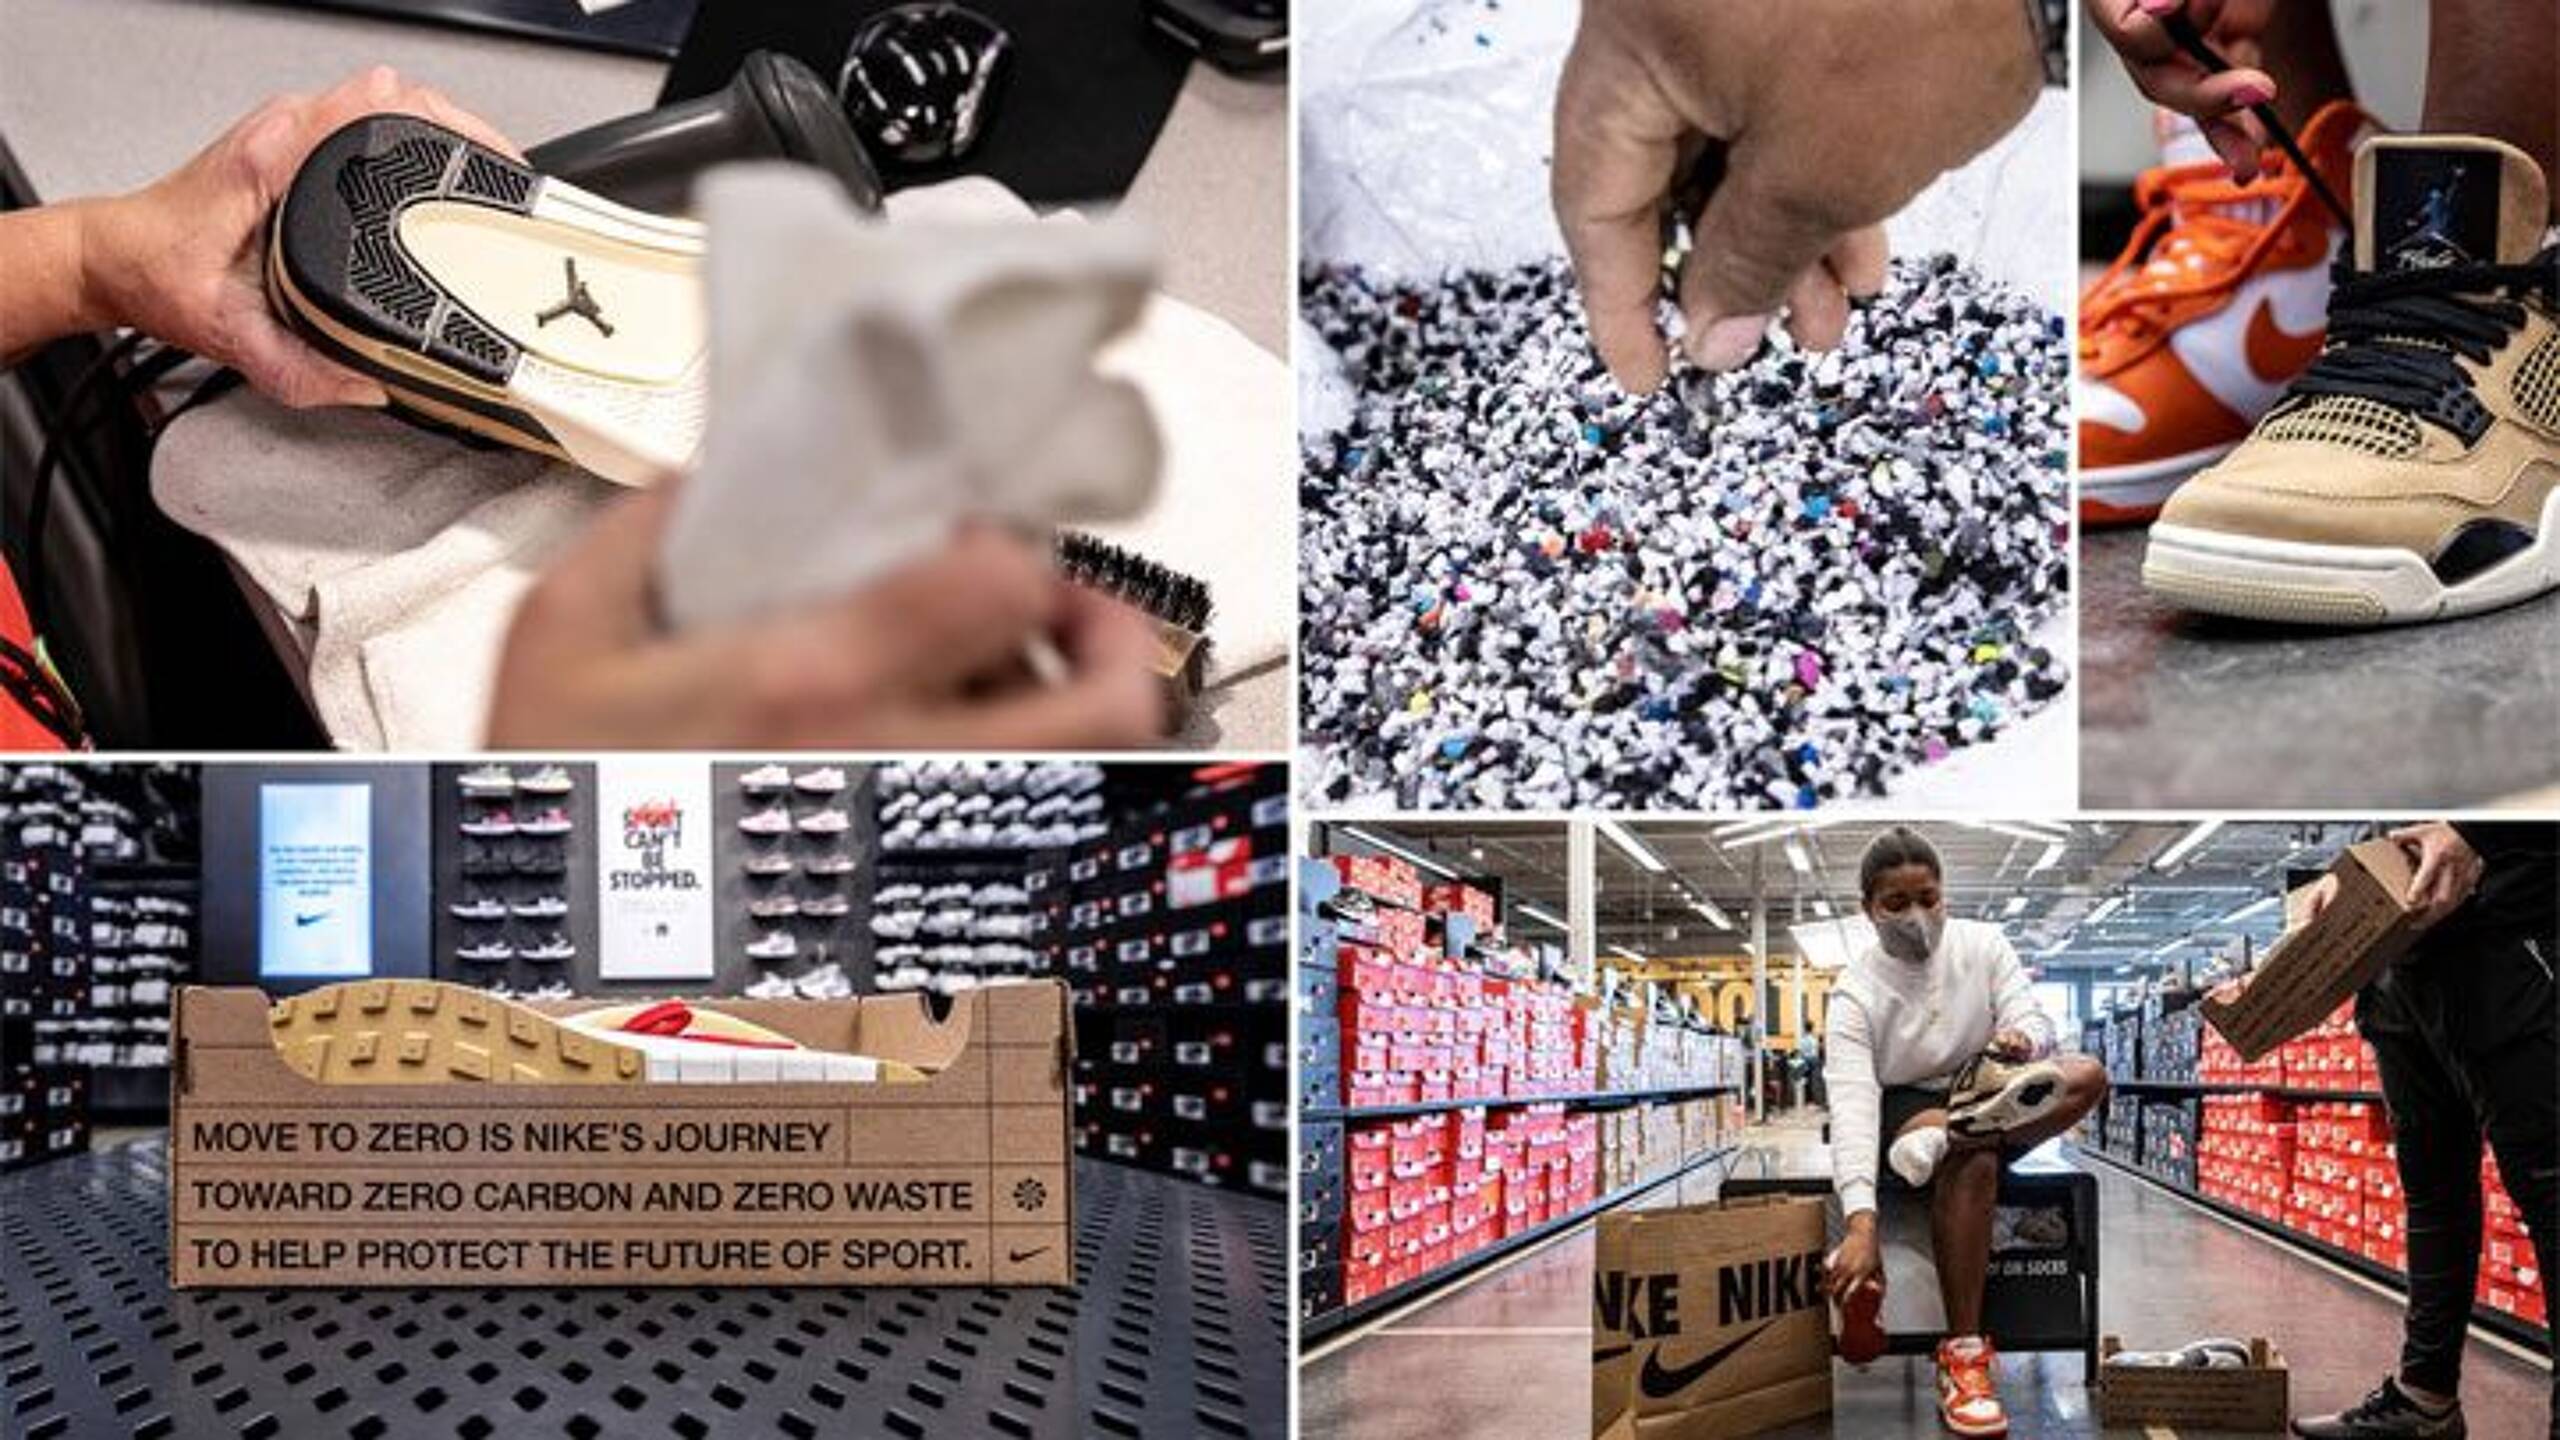 Nike Refurbished: Shoe giant launches new service to help combat waste